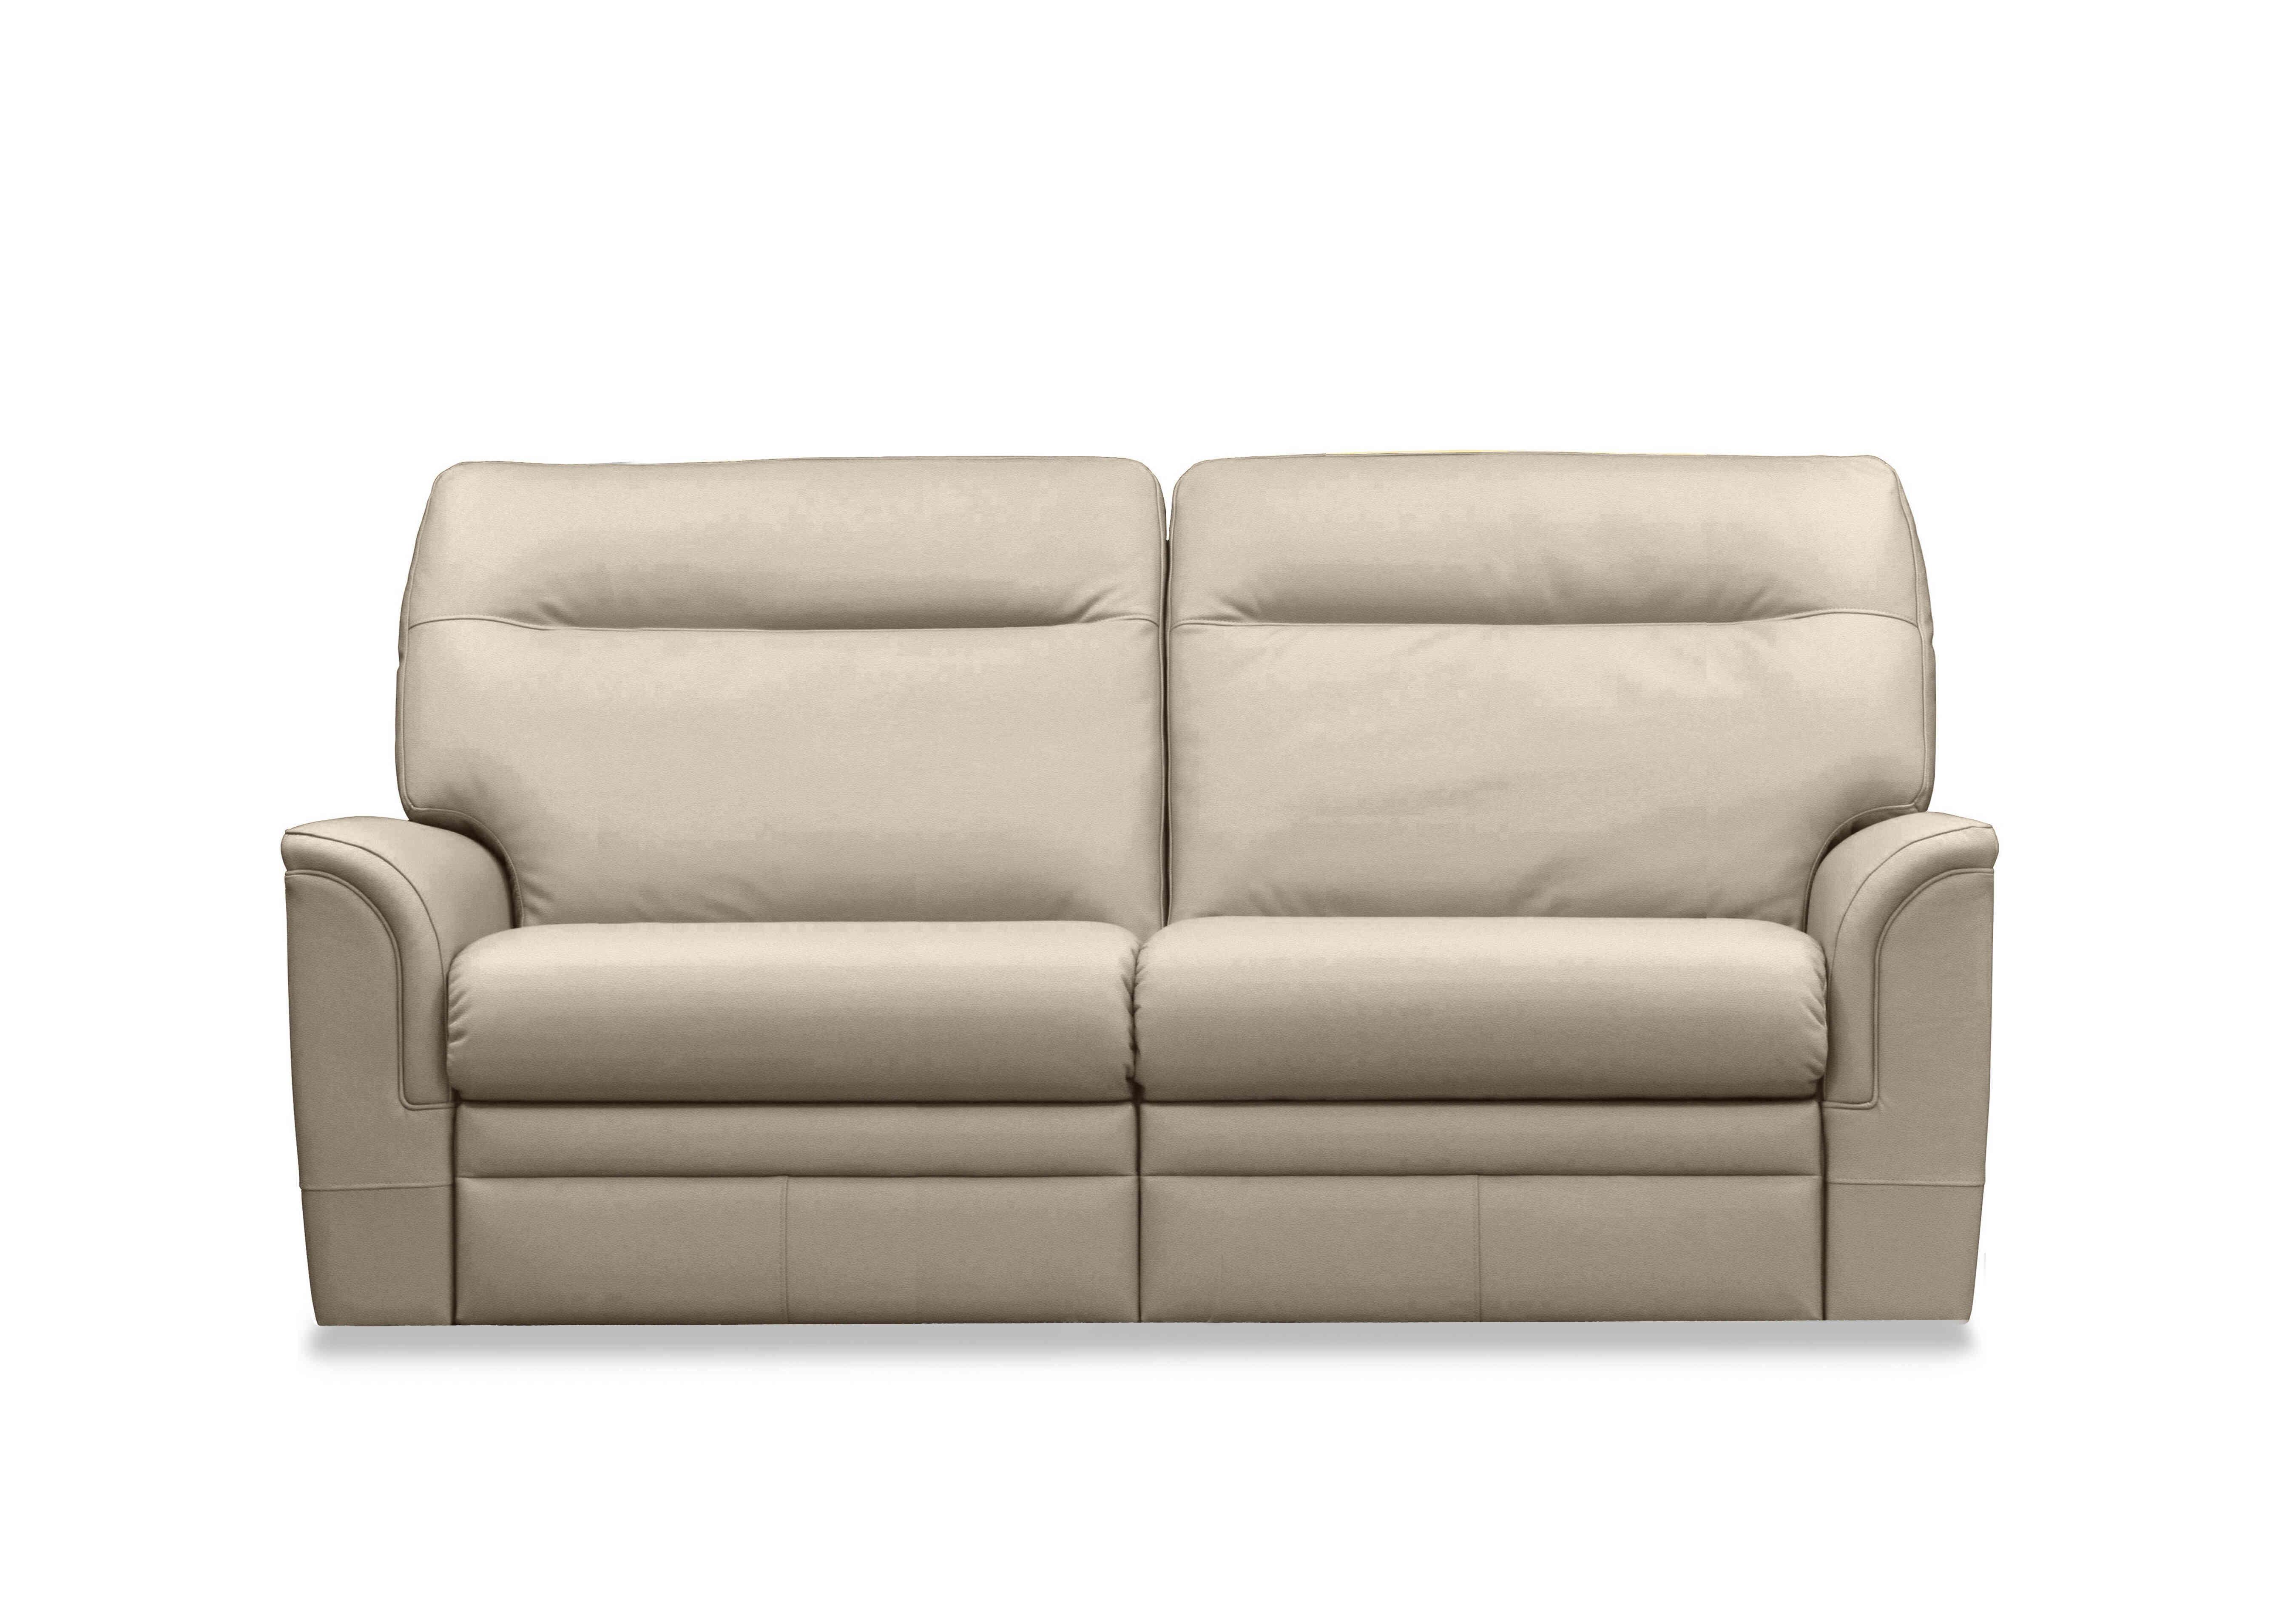 Hudson 23 Large 2 Seater Leather Sofa in Como Taupe 0053051-0019 on Furniture Village